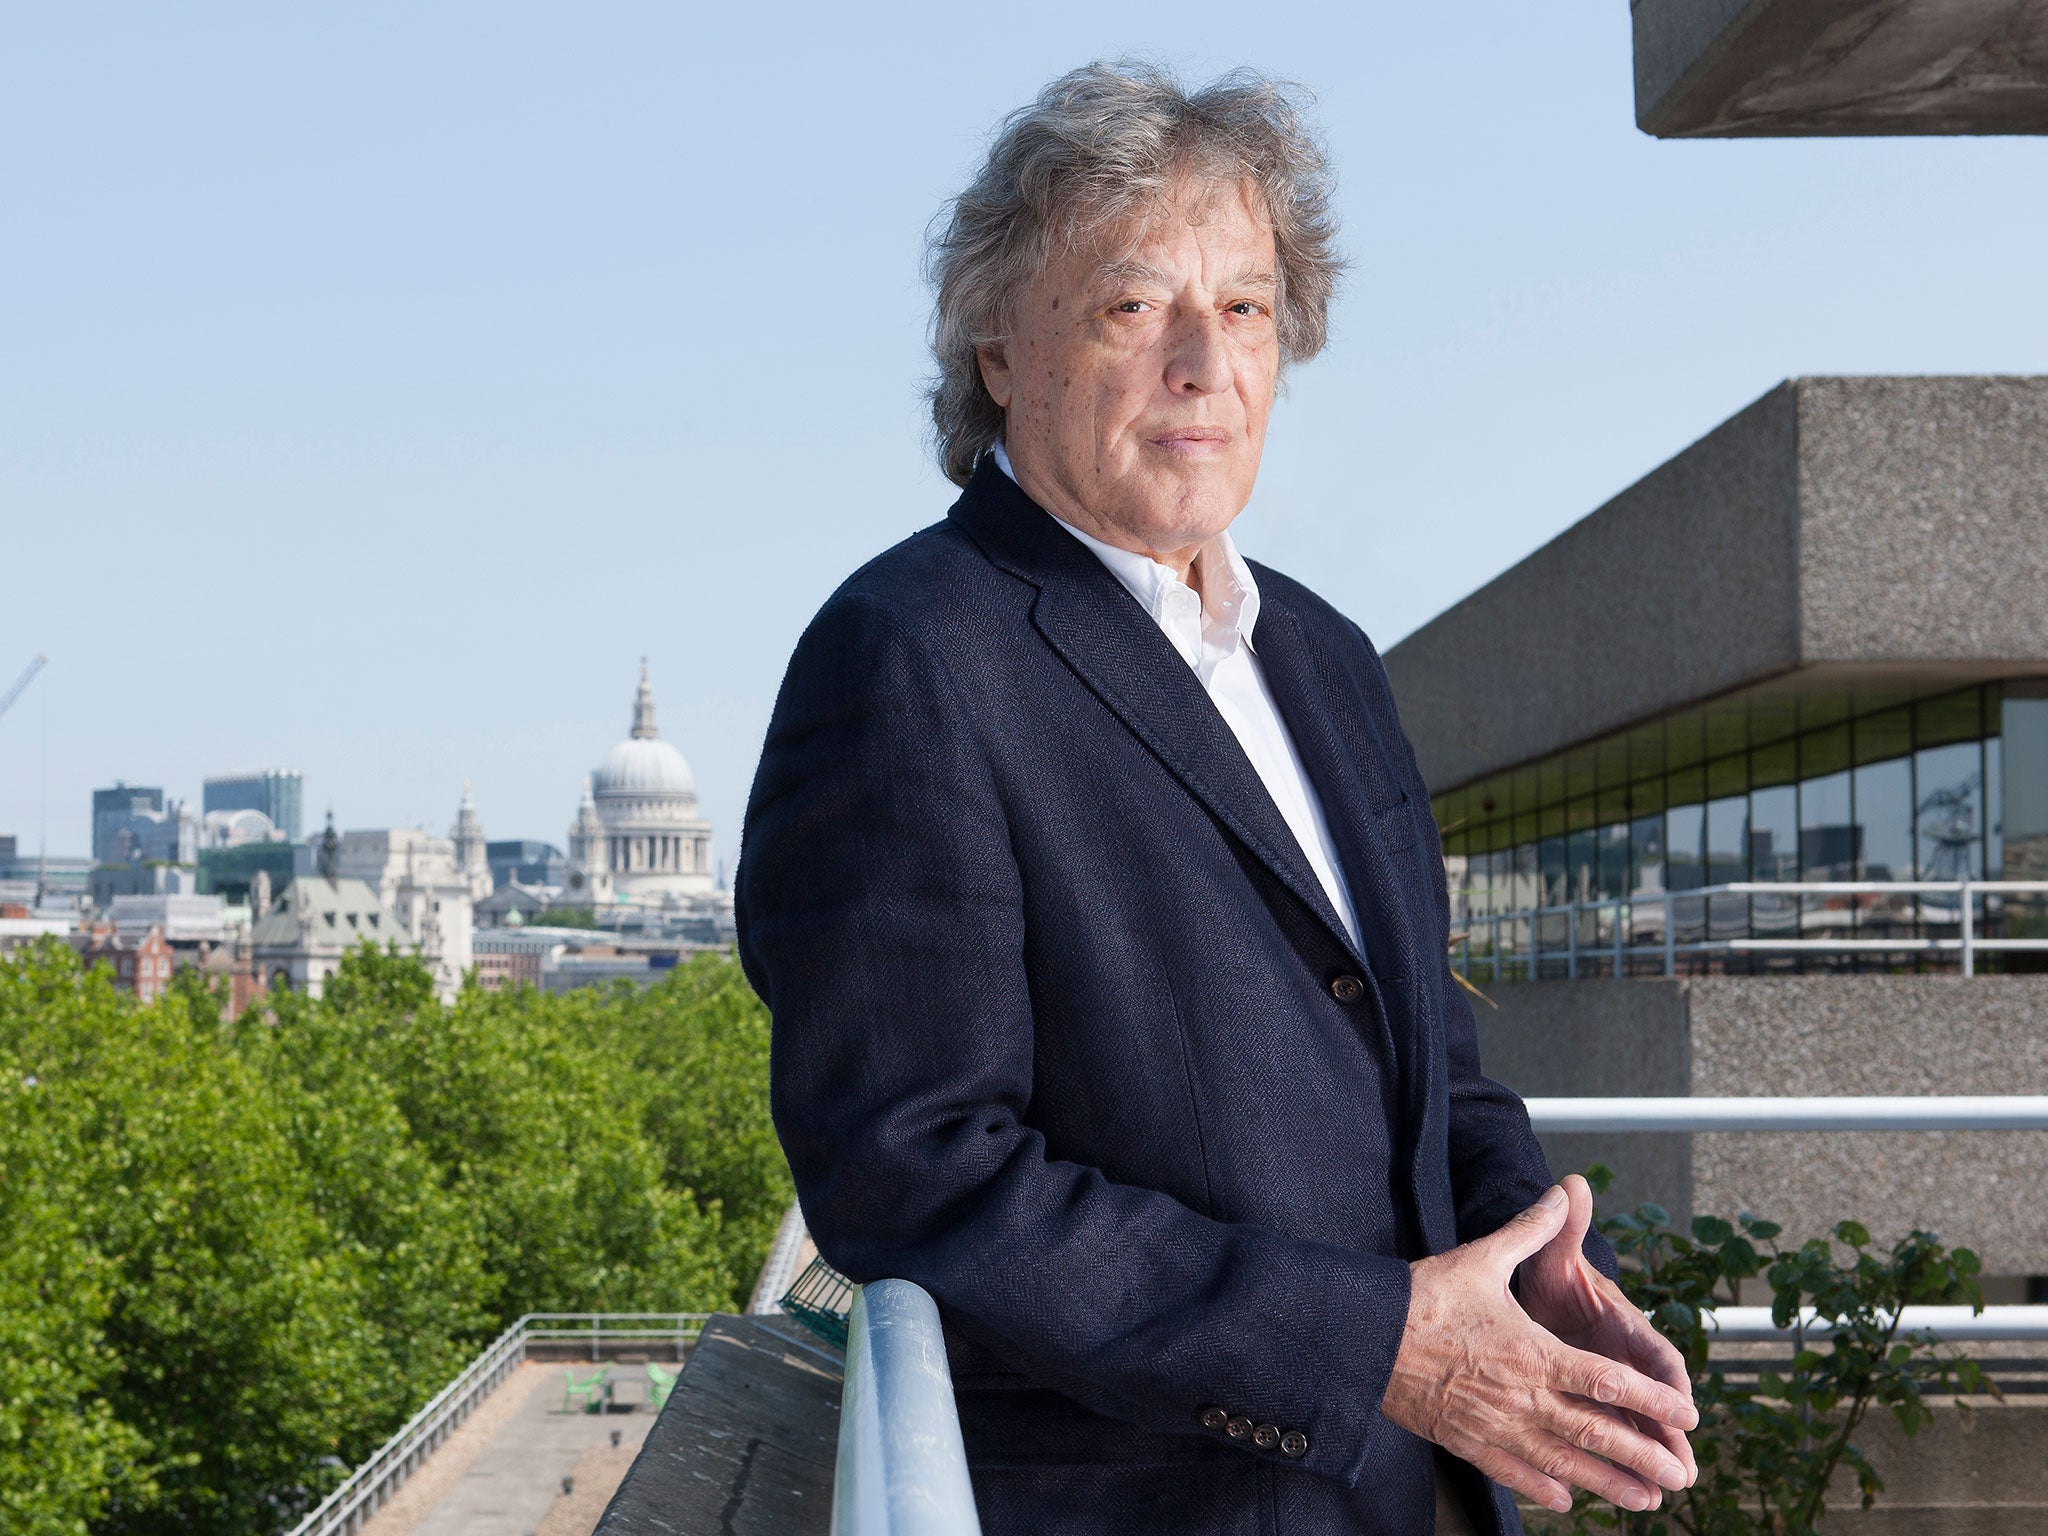 The playwright Sir Tom Stoppard photographed by Barry Marsden